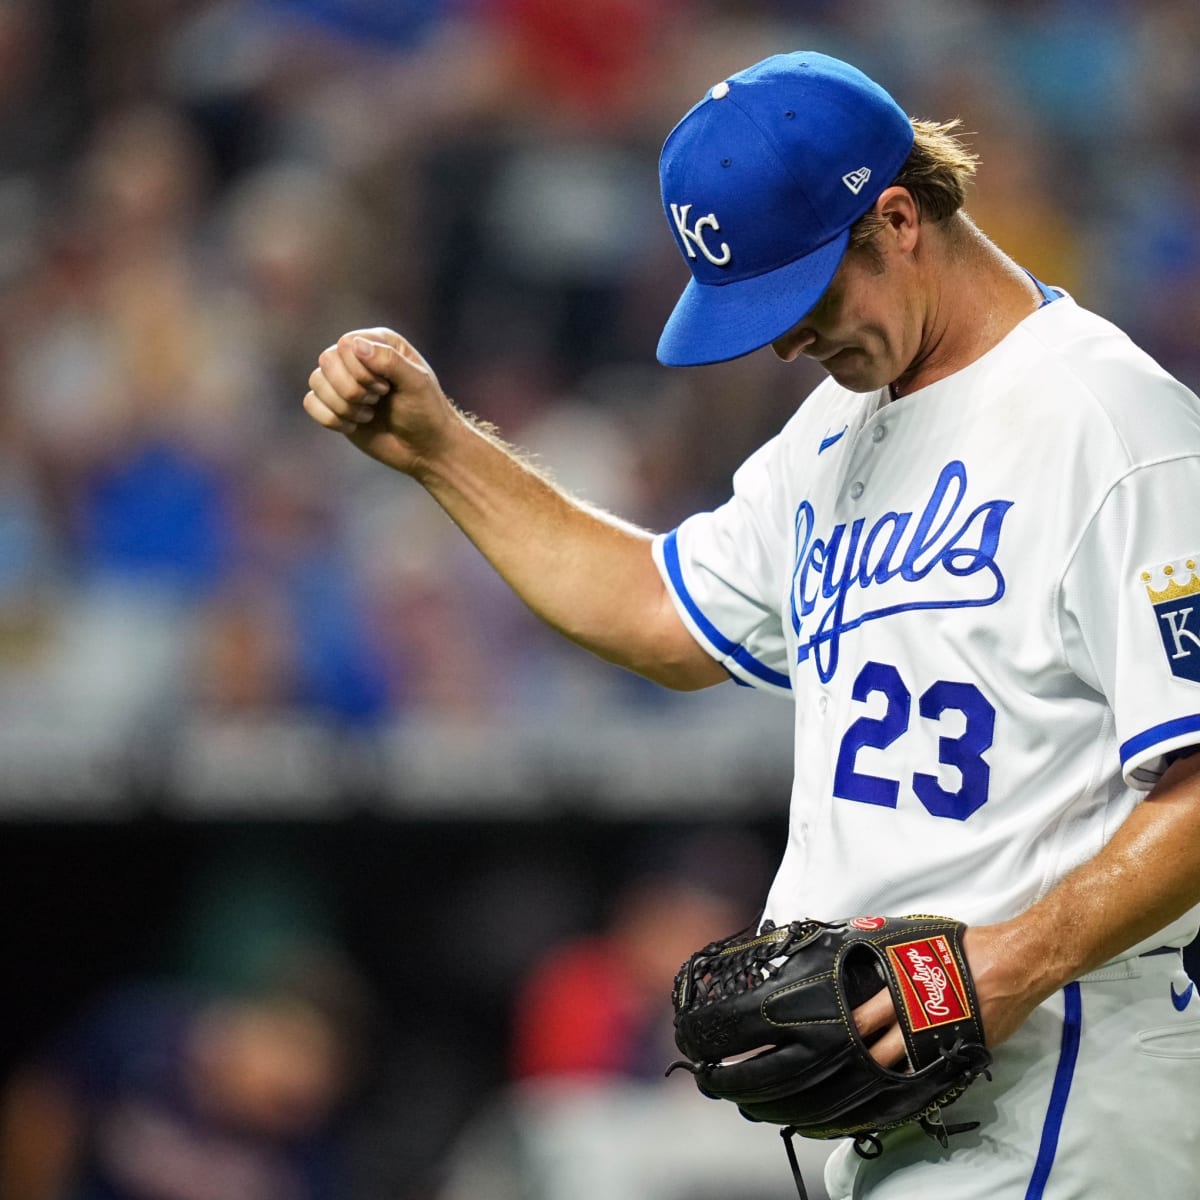 WATCH: Zack Greinke Picks Up 1,000th Strikeout as Member of Royals